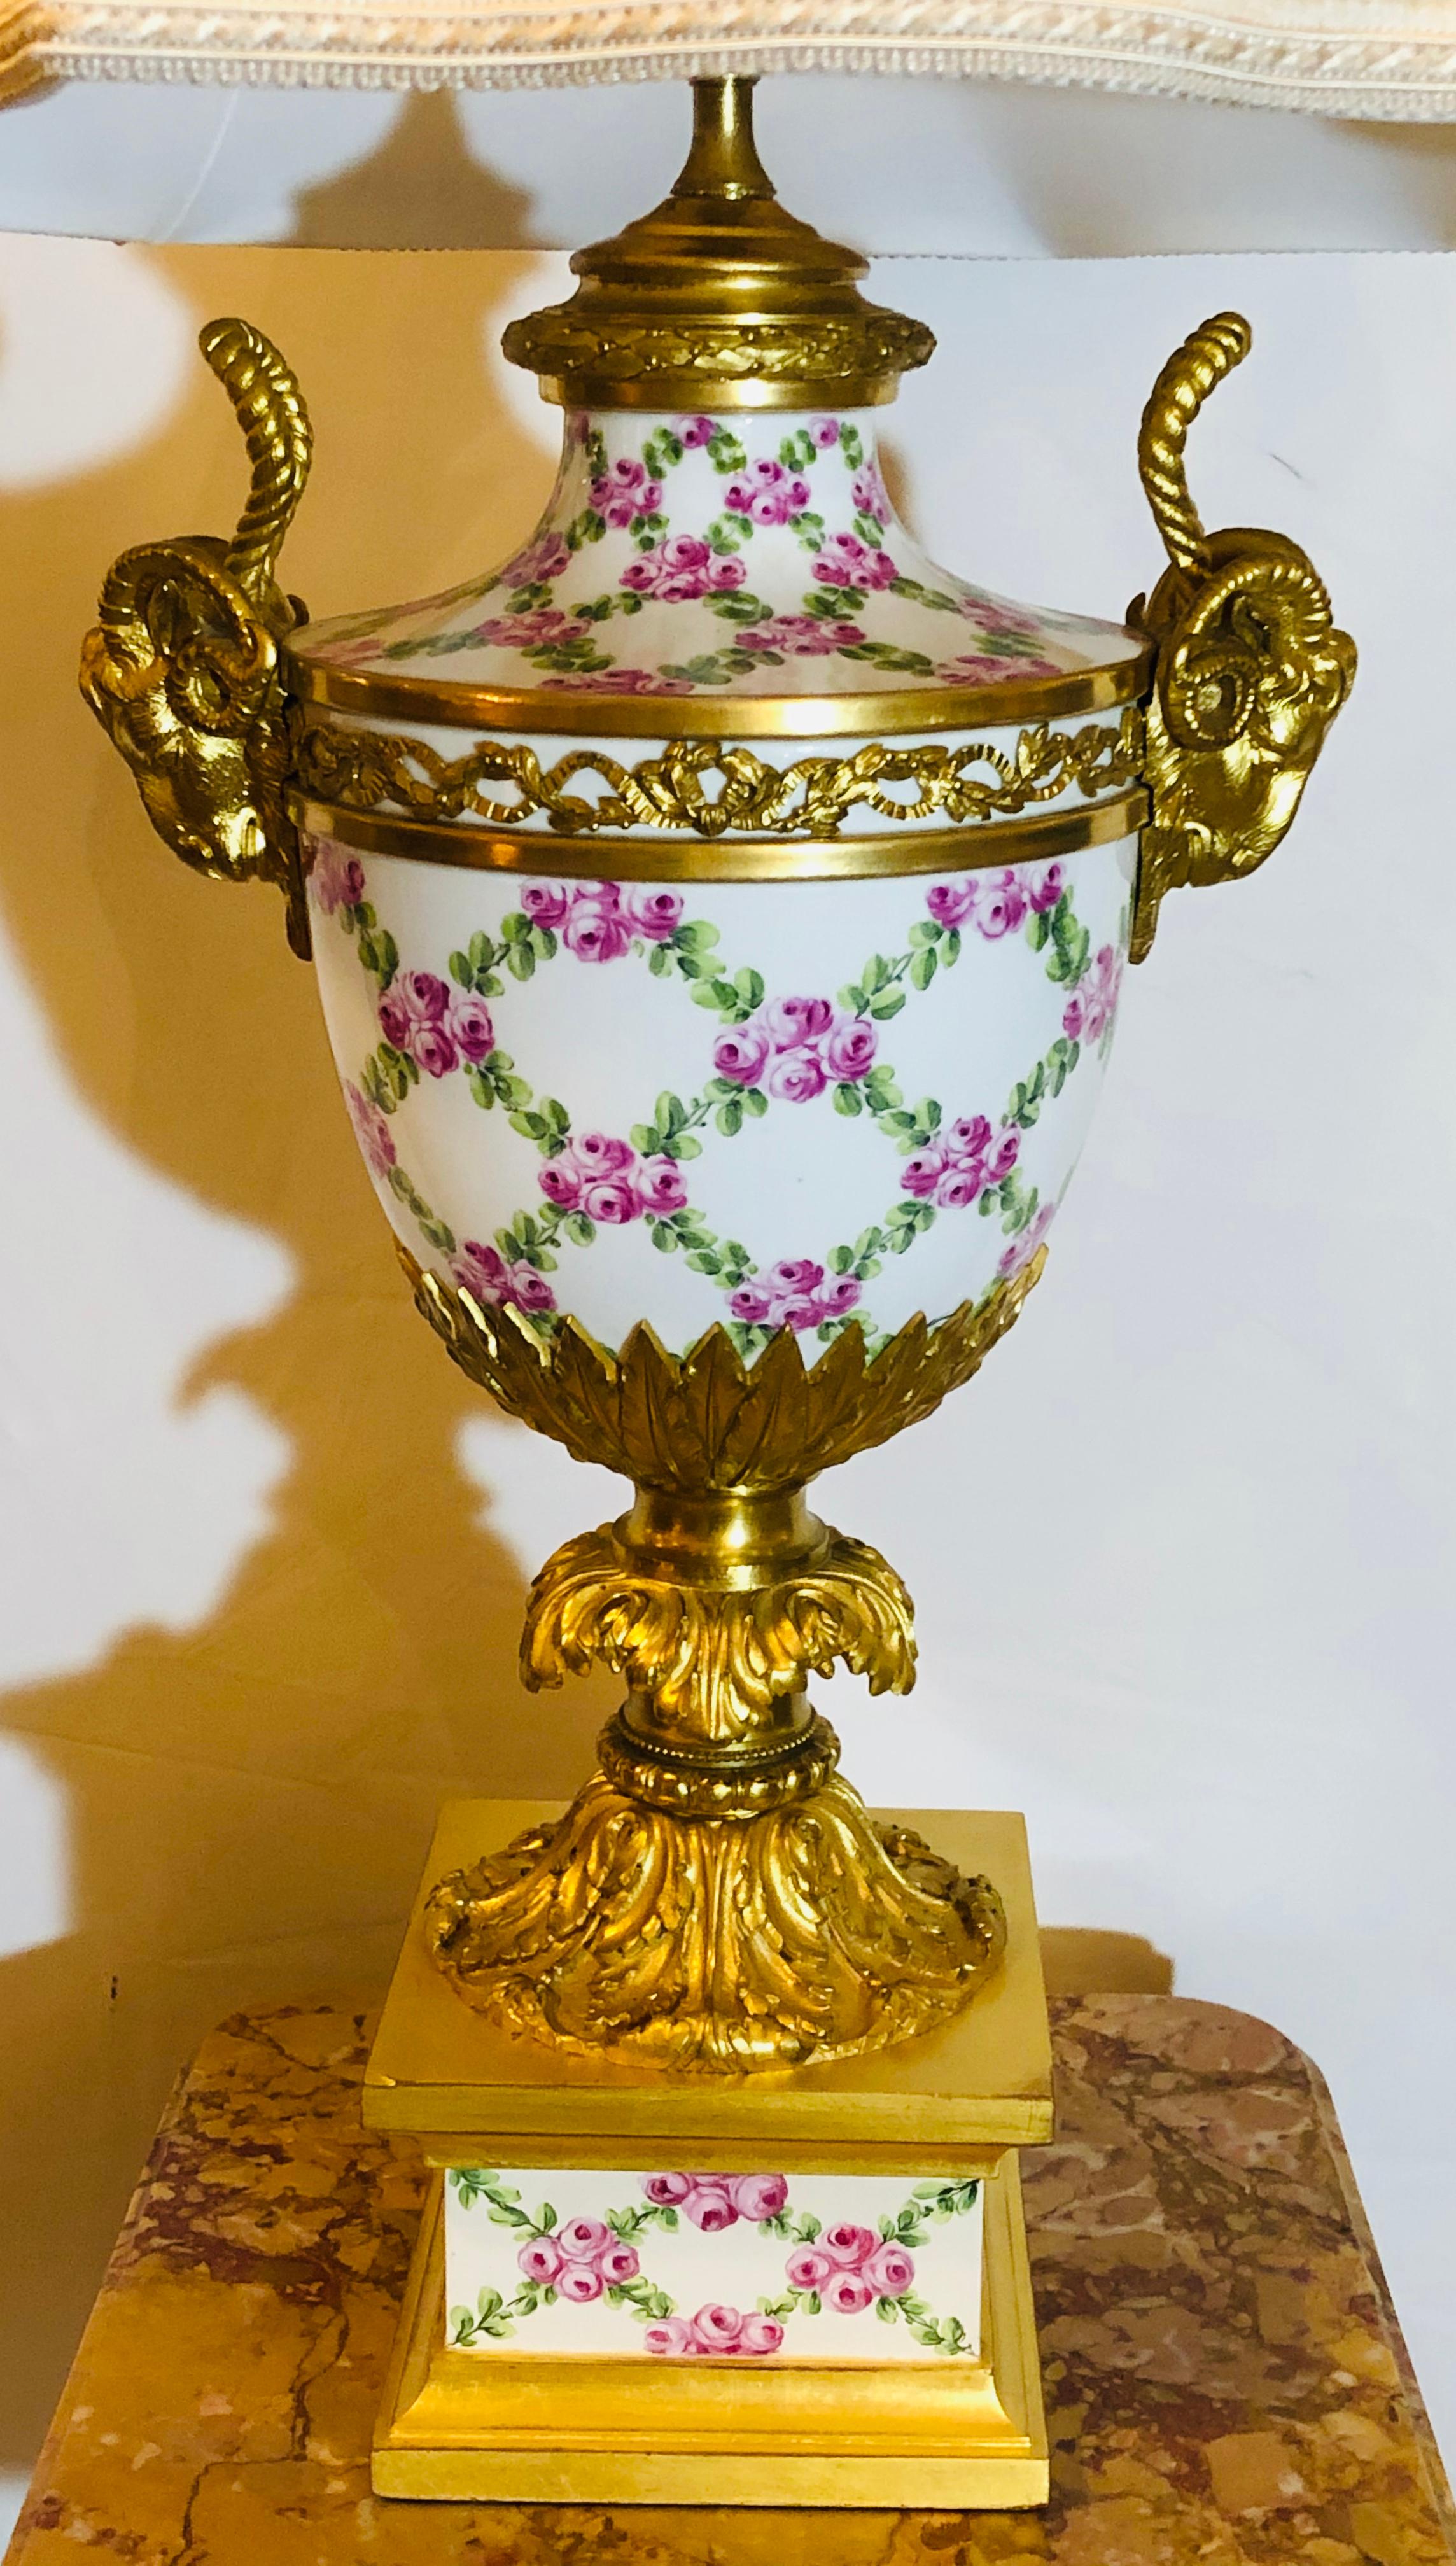 French table lamp trellis floral porcelain urn with bronze horned rams head gilt and bronze mounts. This spectacular urn now mounted as a lamp made in France possibly Sèvres has a fine custom shade and is certain to light up any room it sits in.